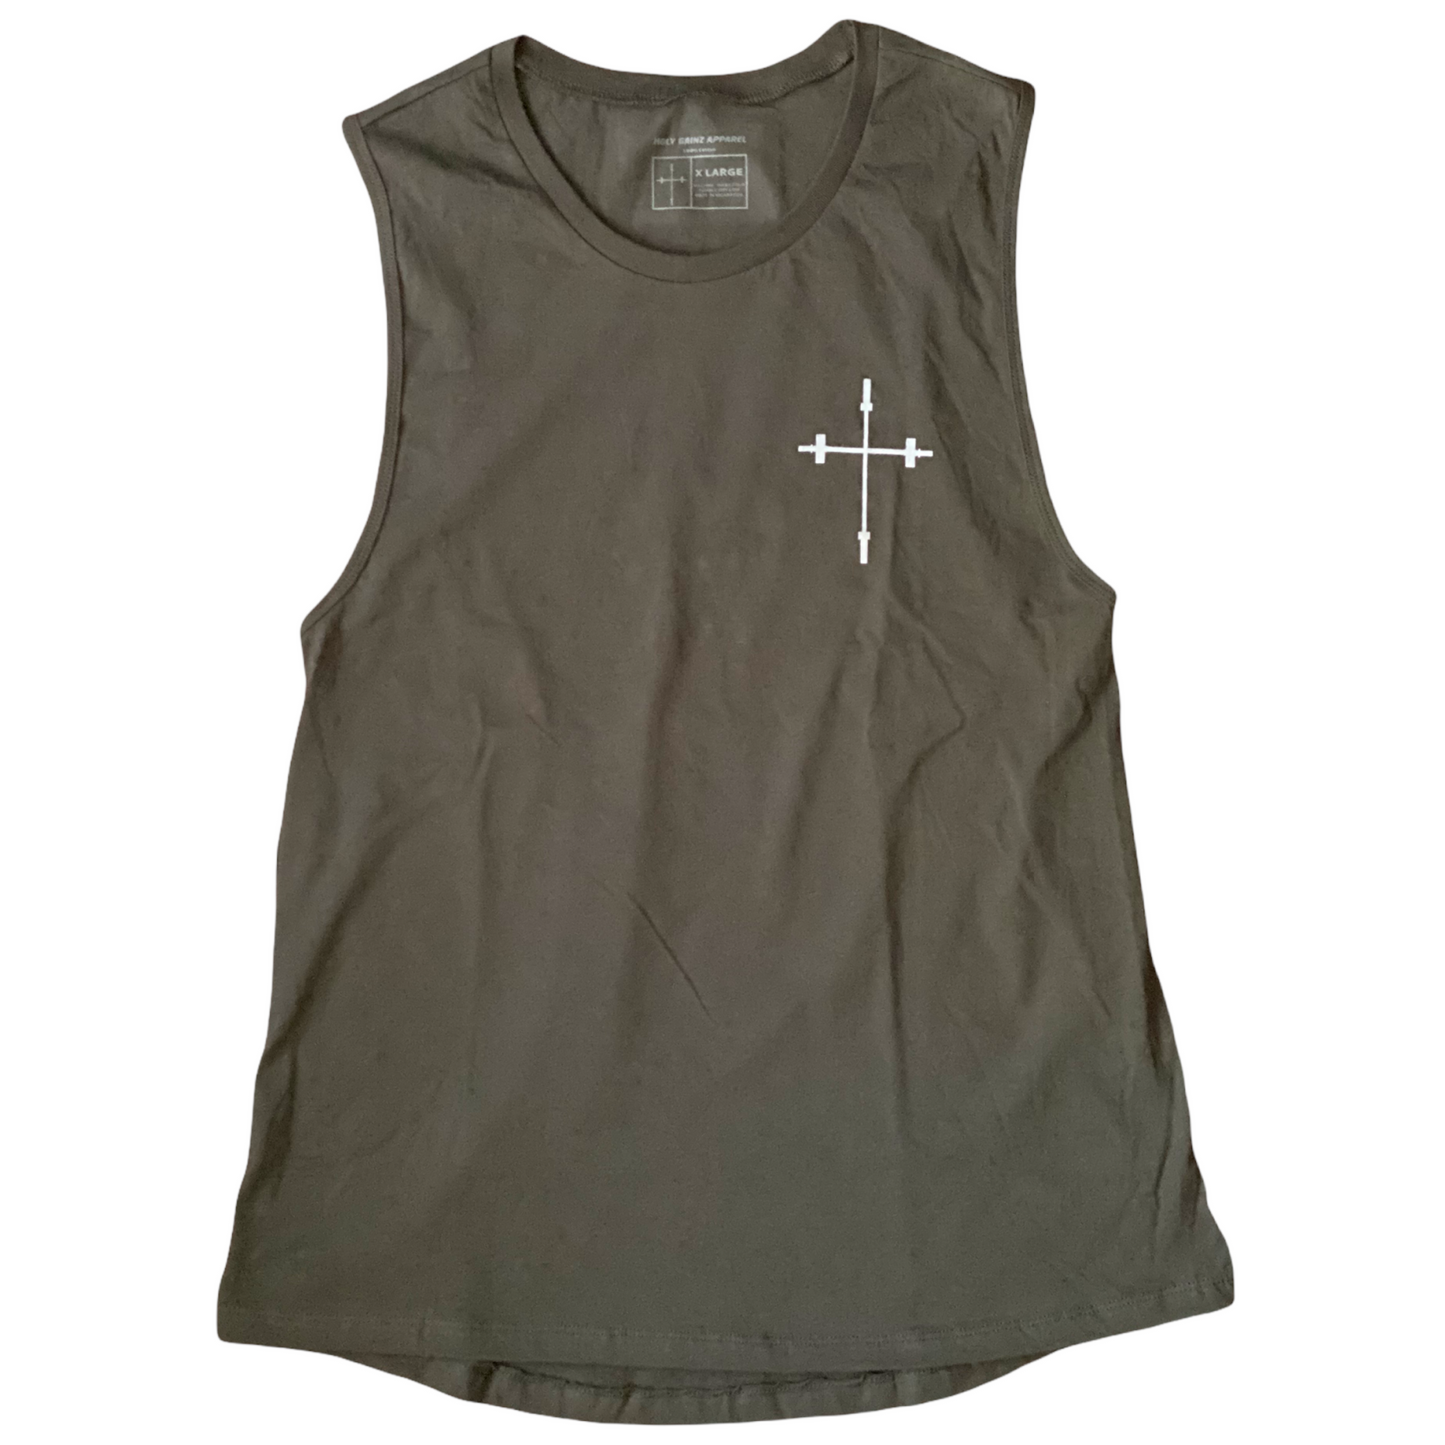 Holy Gainz Apparel CLASSIC LOGO Ladies Muscle Tank